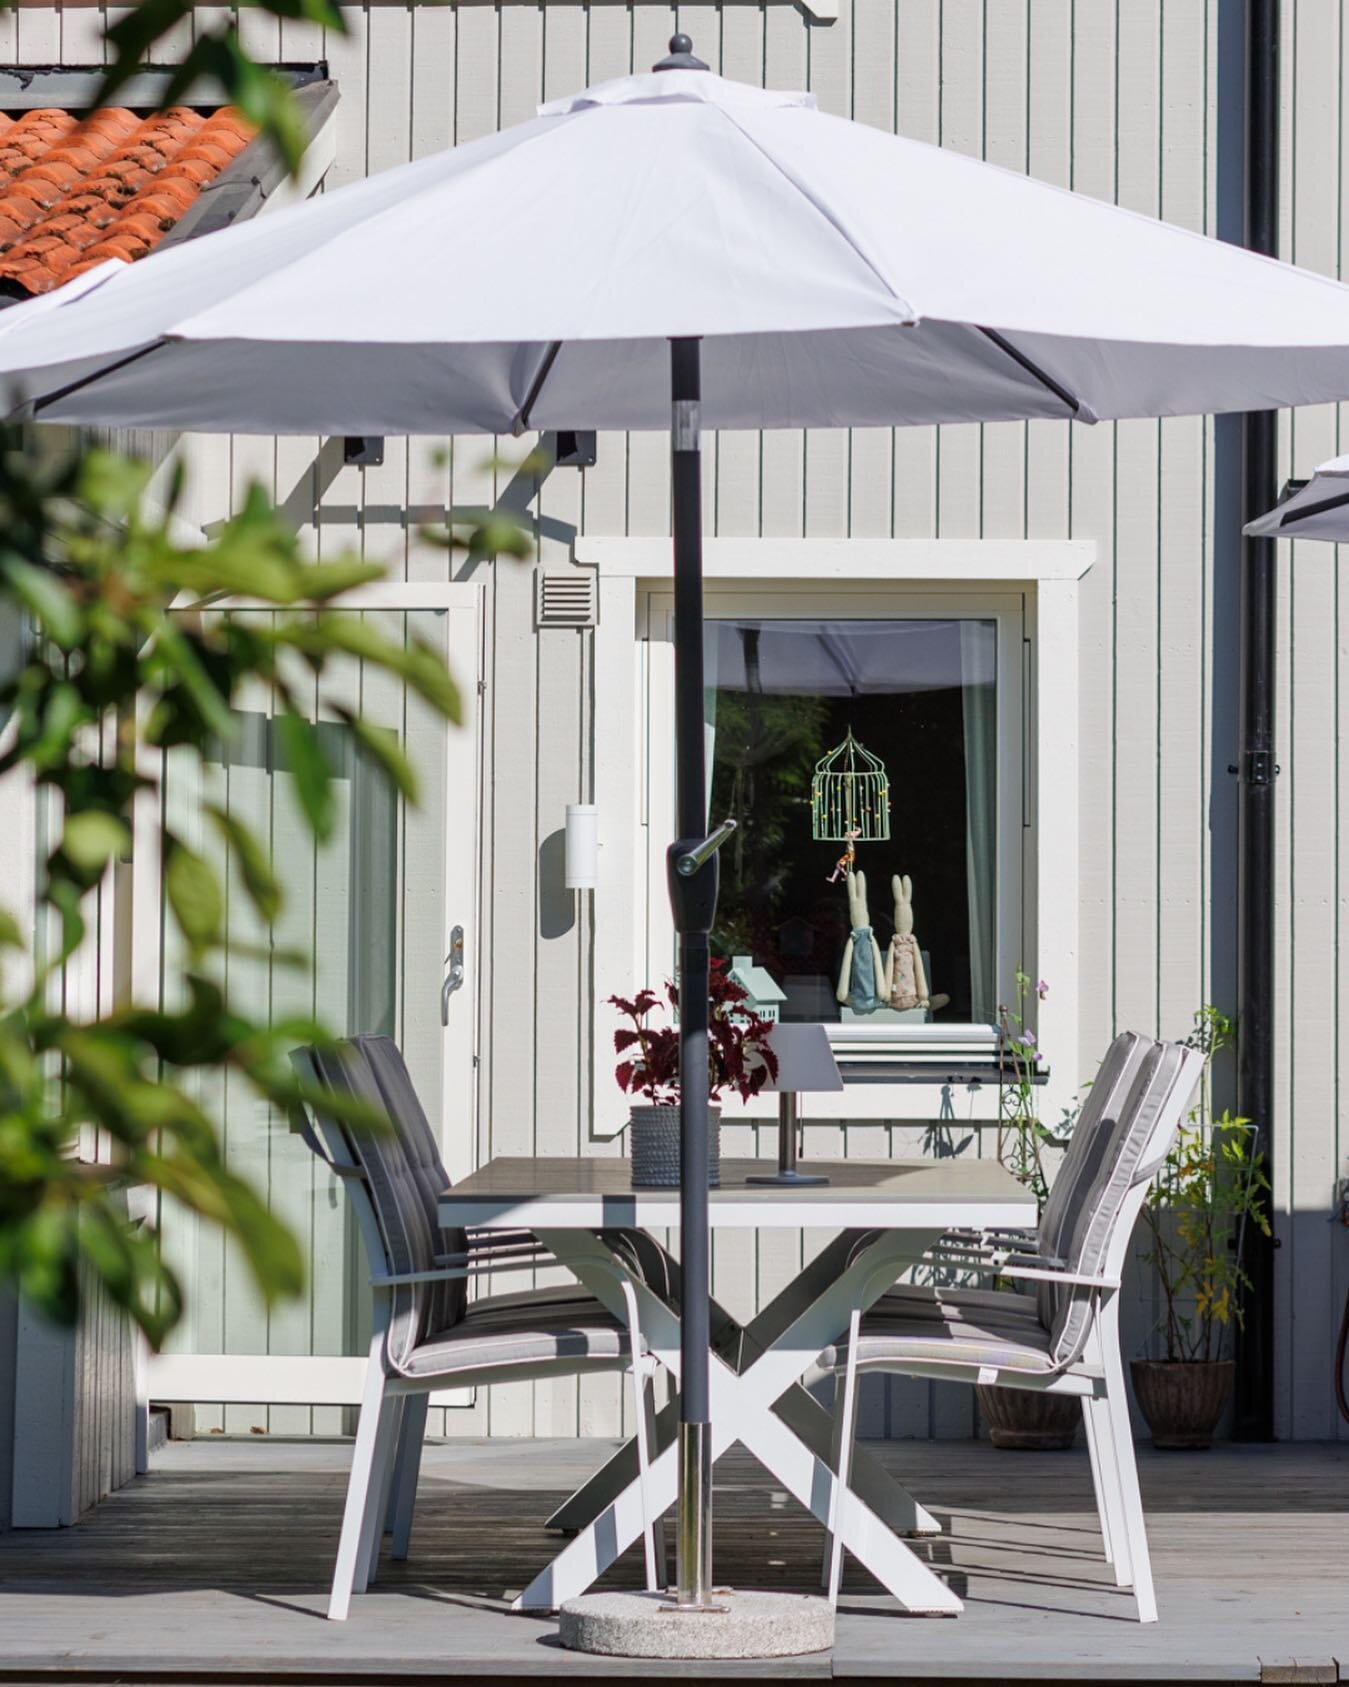 It&rsquo;s so the best time of year for exterior shots if you&rsquo;re selling your property. 

More sunshine, please!!!

#exteriors #property #hemnet #garden #altaninspiration #realestate #summer #sweden